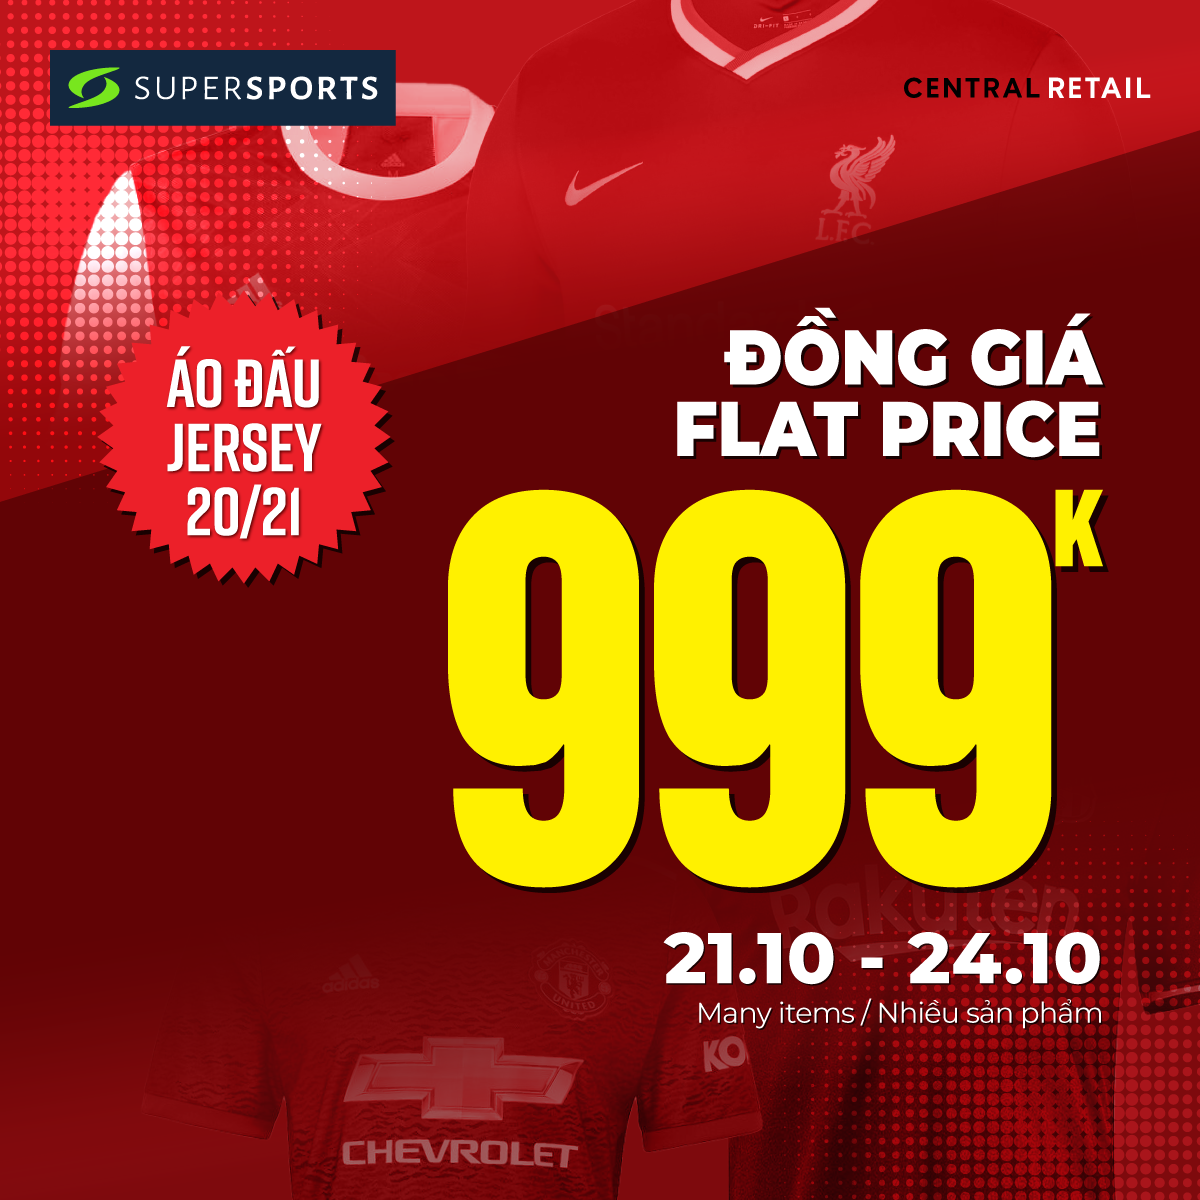 ⚽️FLAT PRICE 999K - JERSEYS 20/21 AT SUPERSPORTS FROM 21-24/10